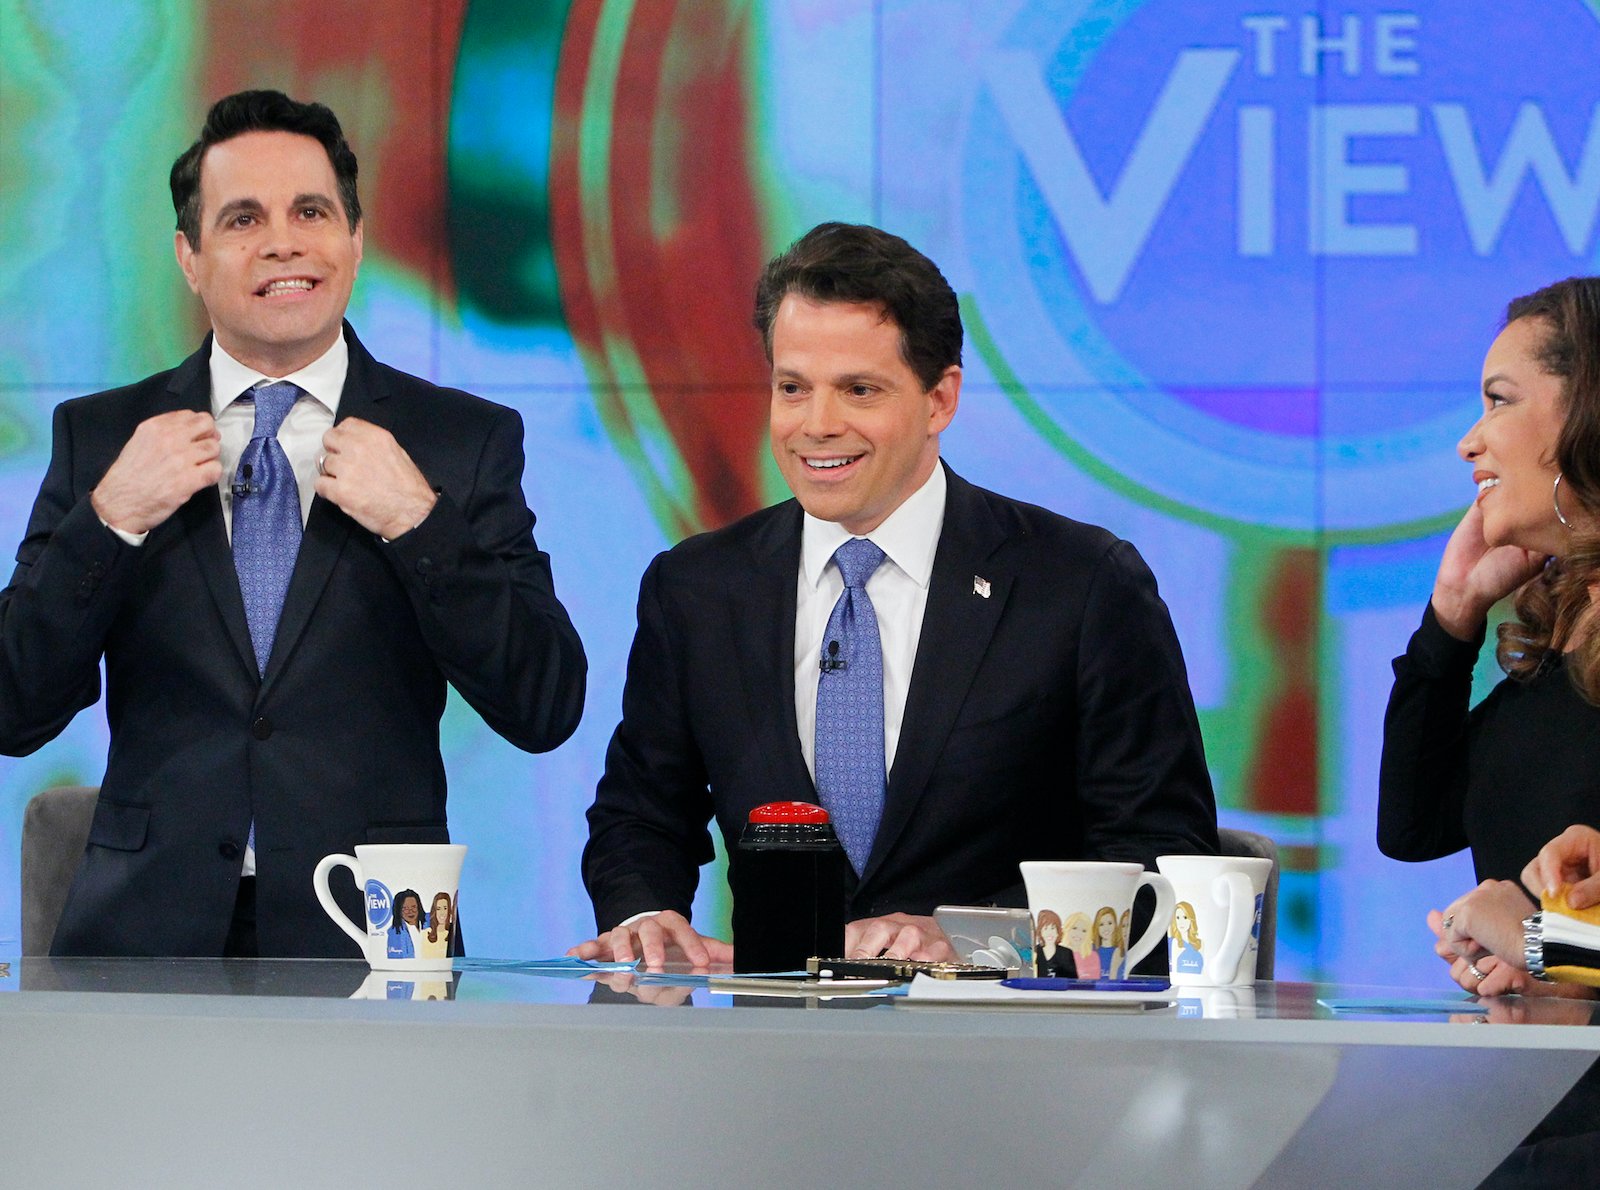 Mario Cantone holds his jacket lapel while standing next to Anthony Scaramucci and Sunny Hostin who are seated